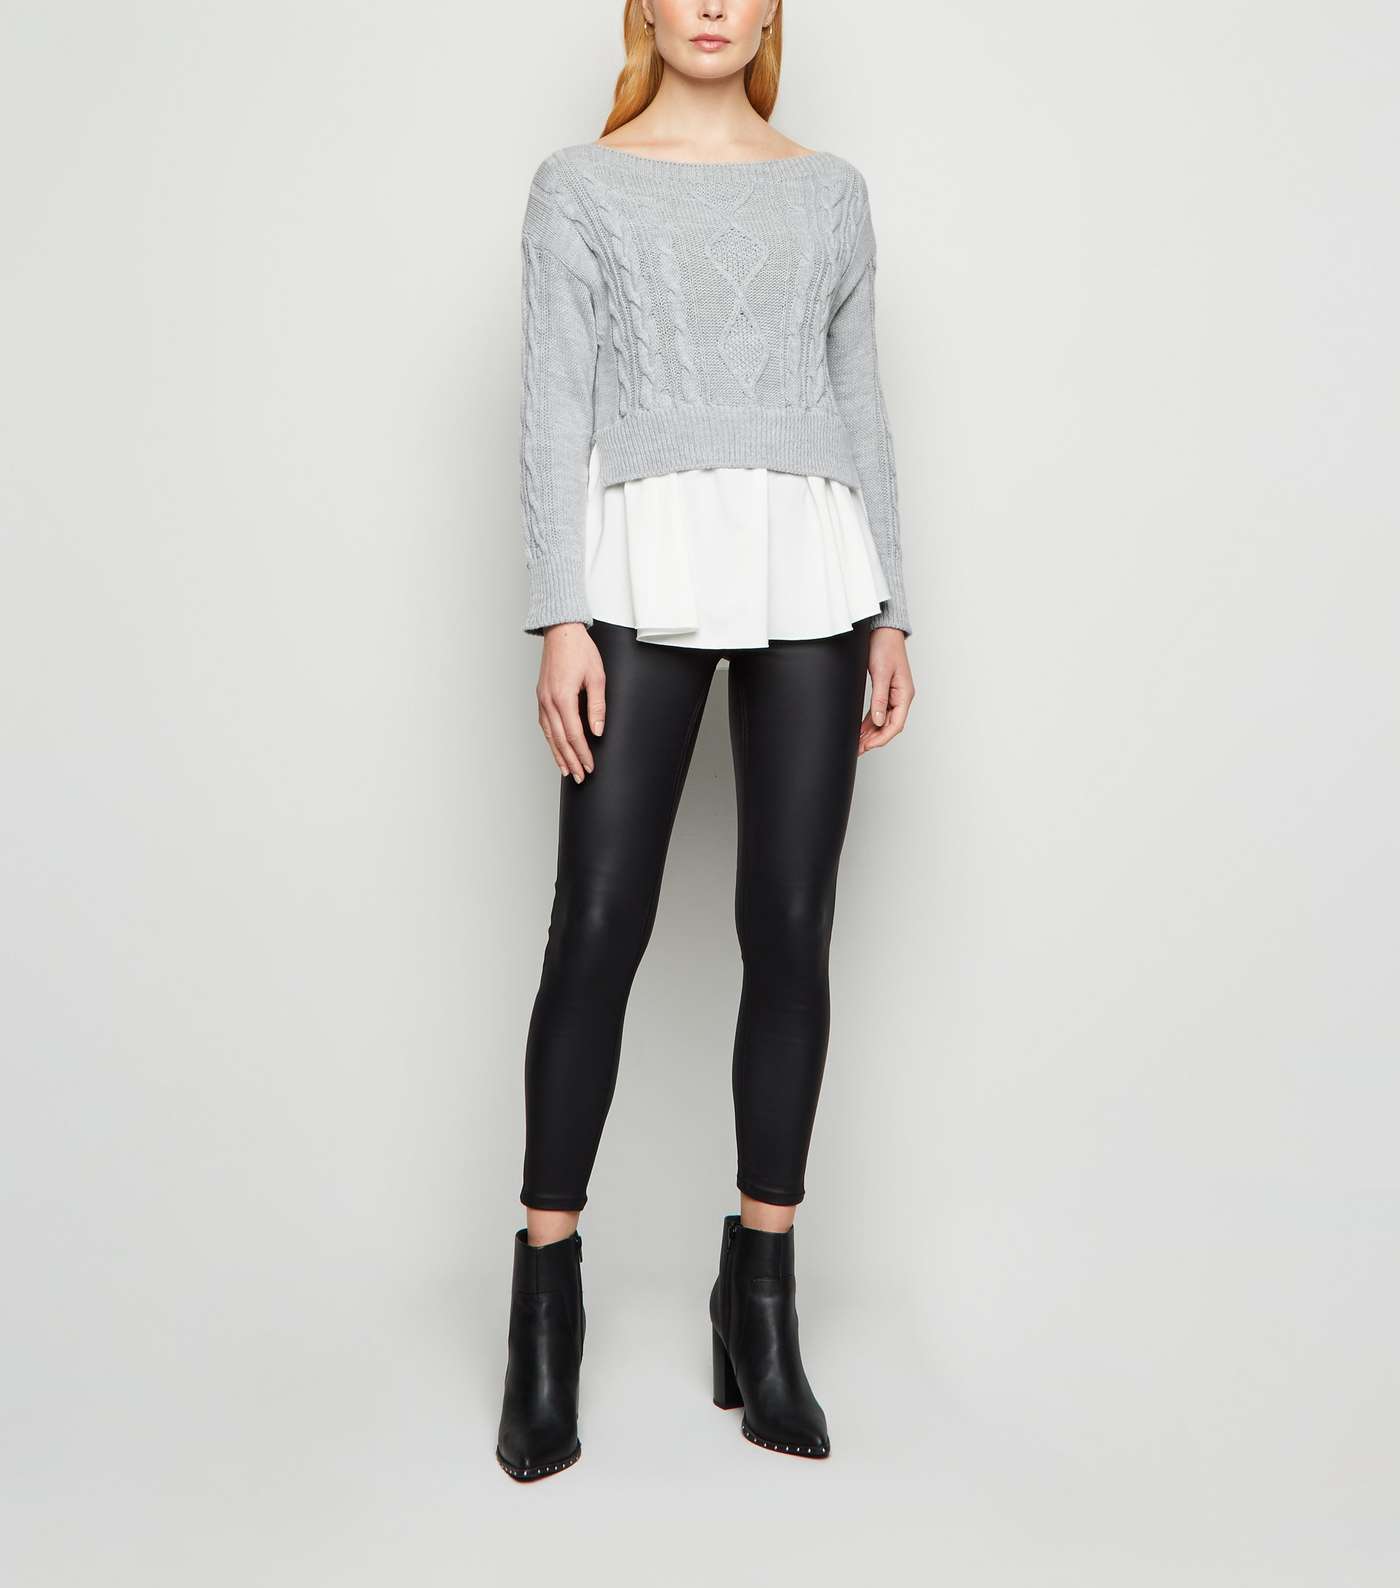 Cameo Rose Grey 2-In-1 Cable Knit Jumper Image 2